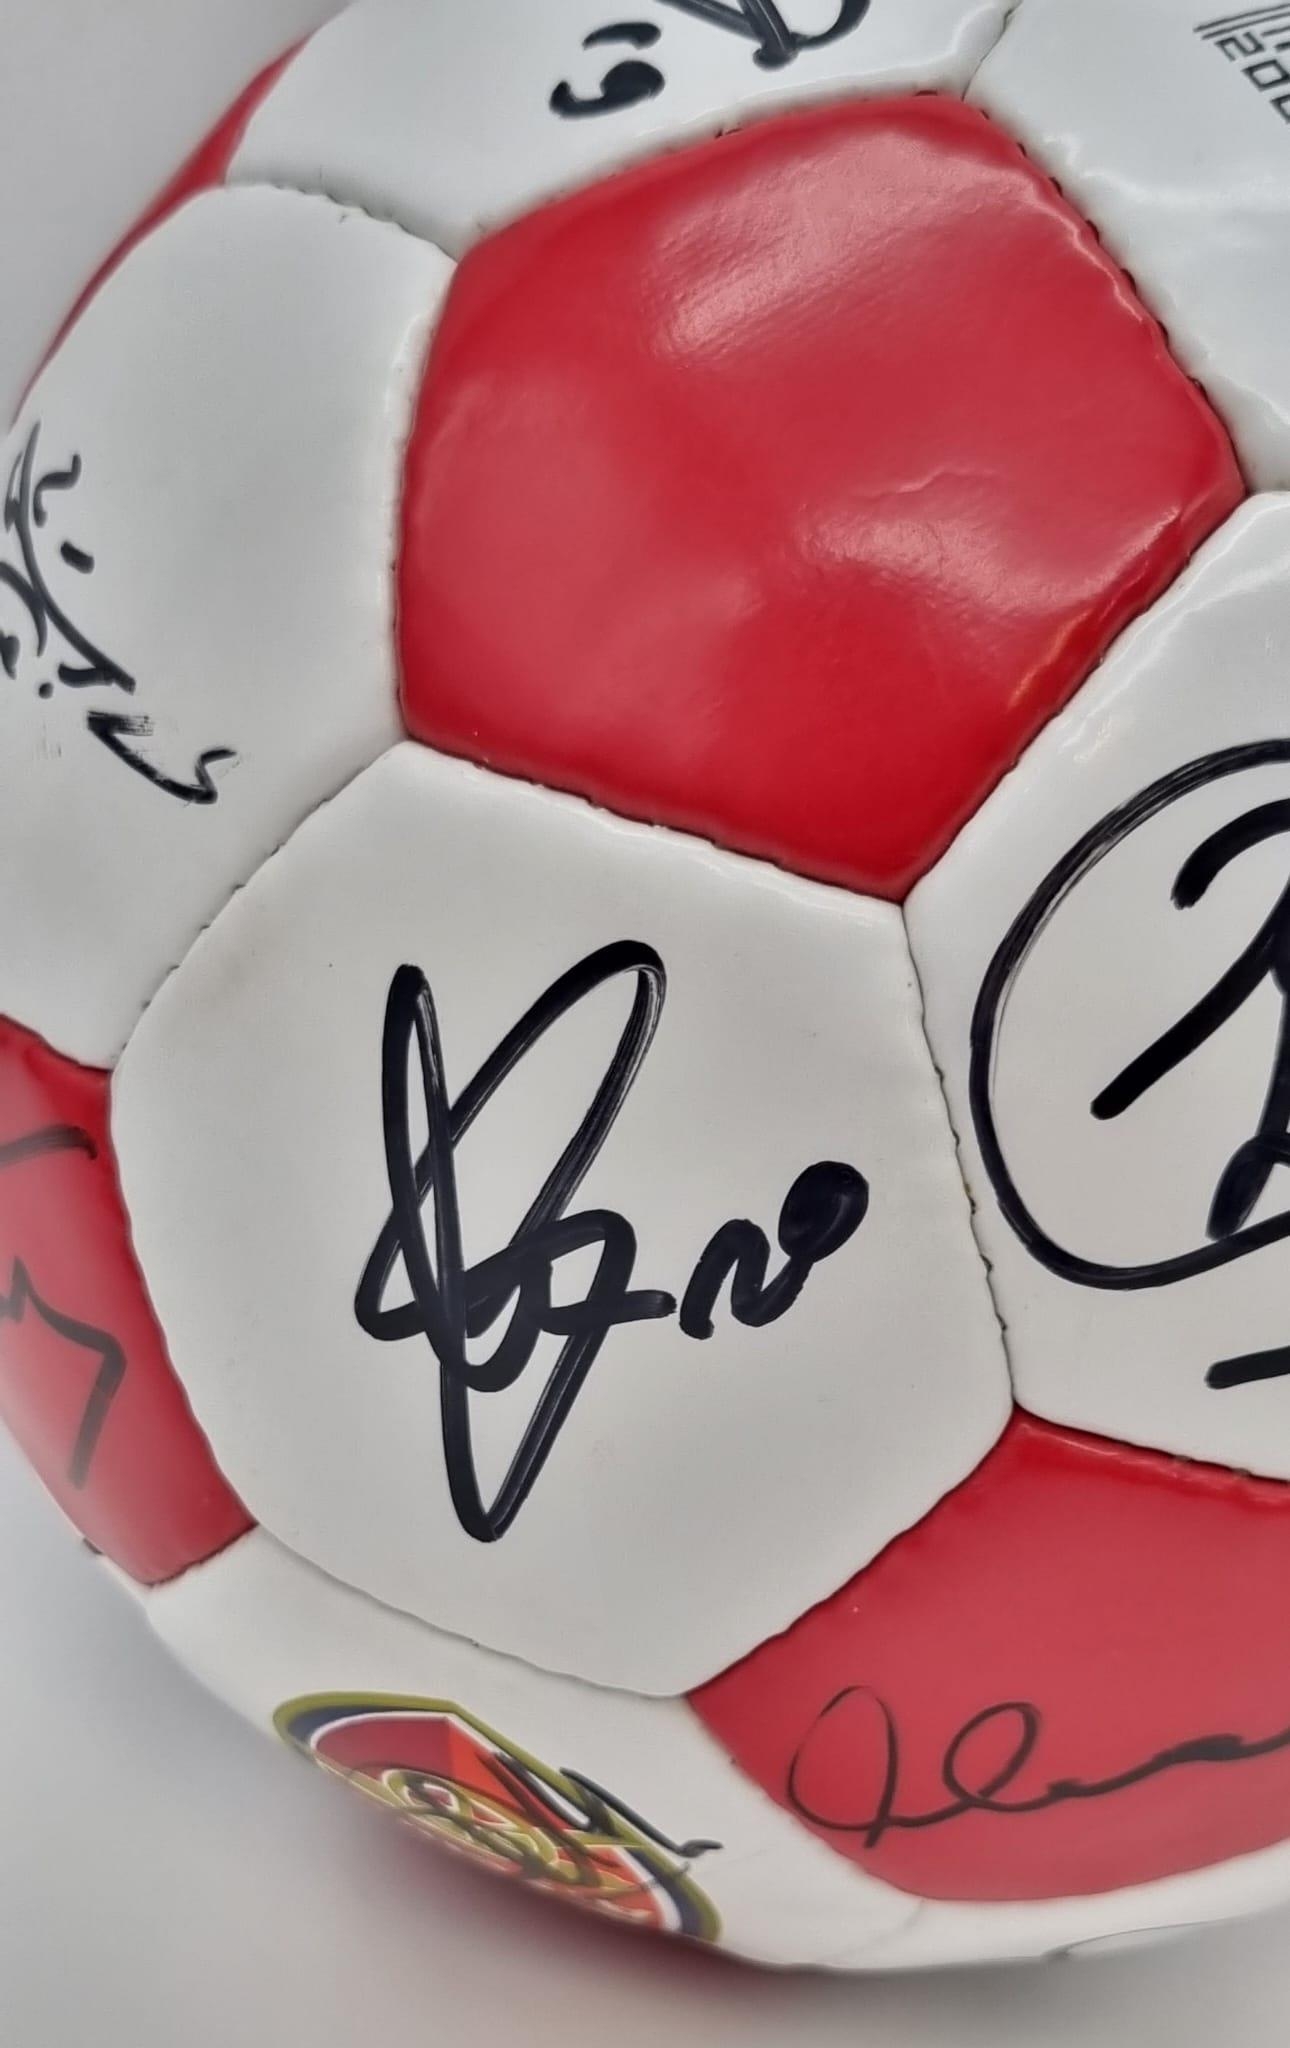 An Incredible Authentic Arsenal FC Invincibles Signed Premier League Winners Football - 2003/4 - Image 16 of 19